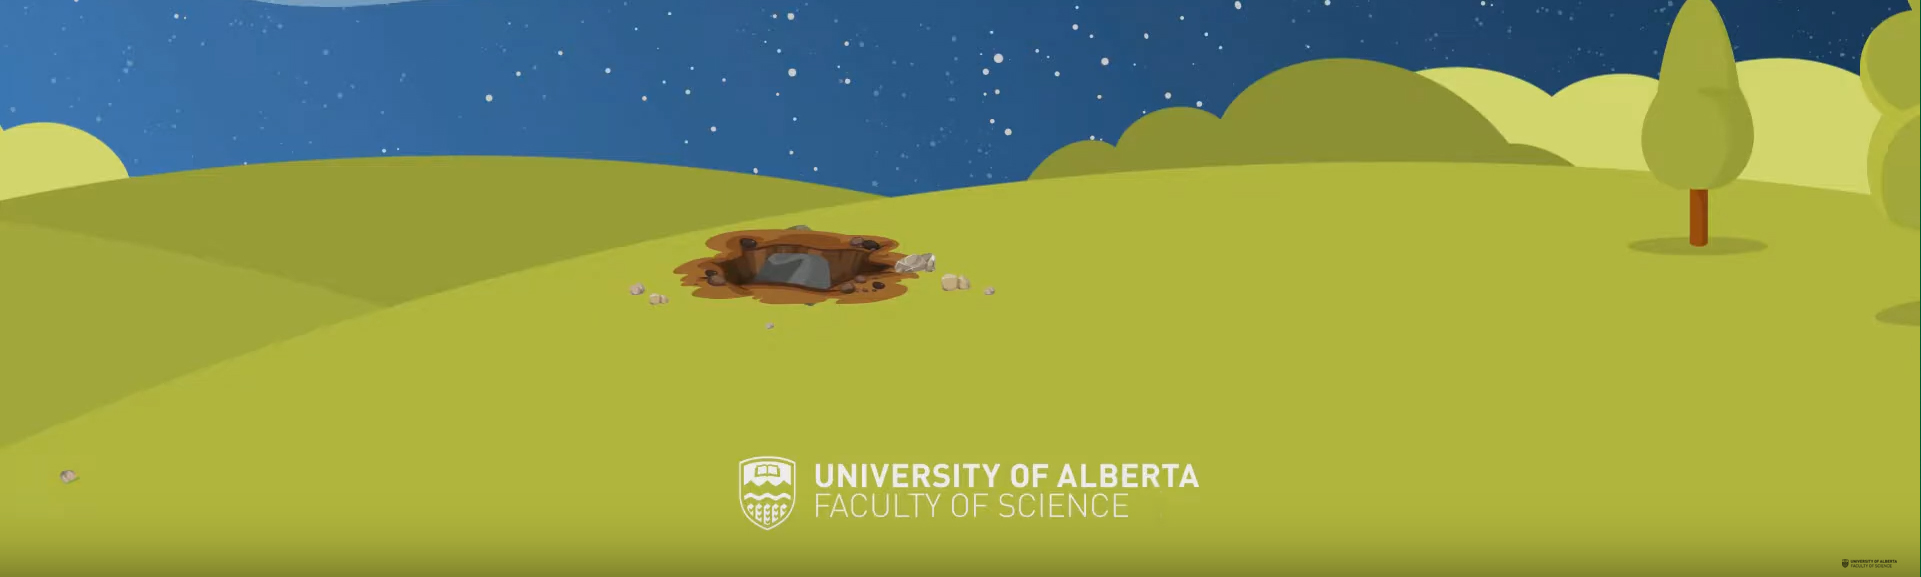 Cartoon image of a meteorite and crater landed on green hills. Text at the bottom of the image reads "University of Alberta, Faculty of Science".